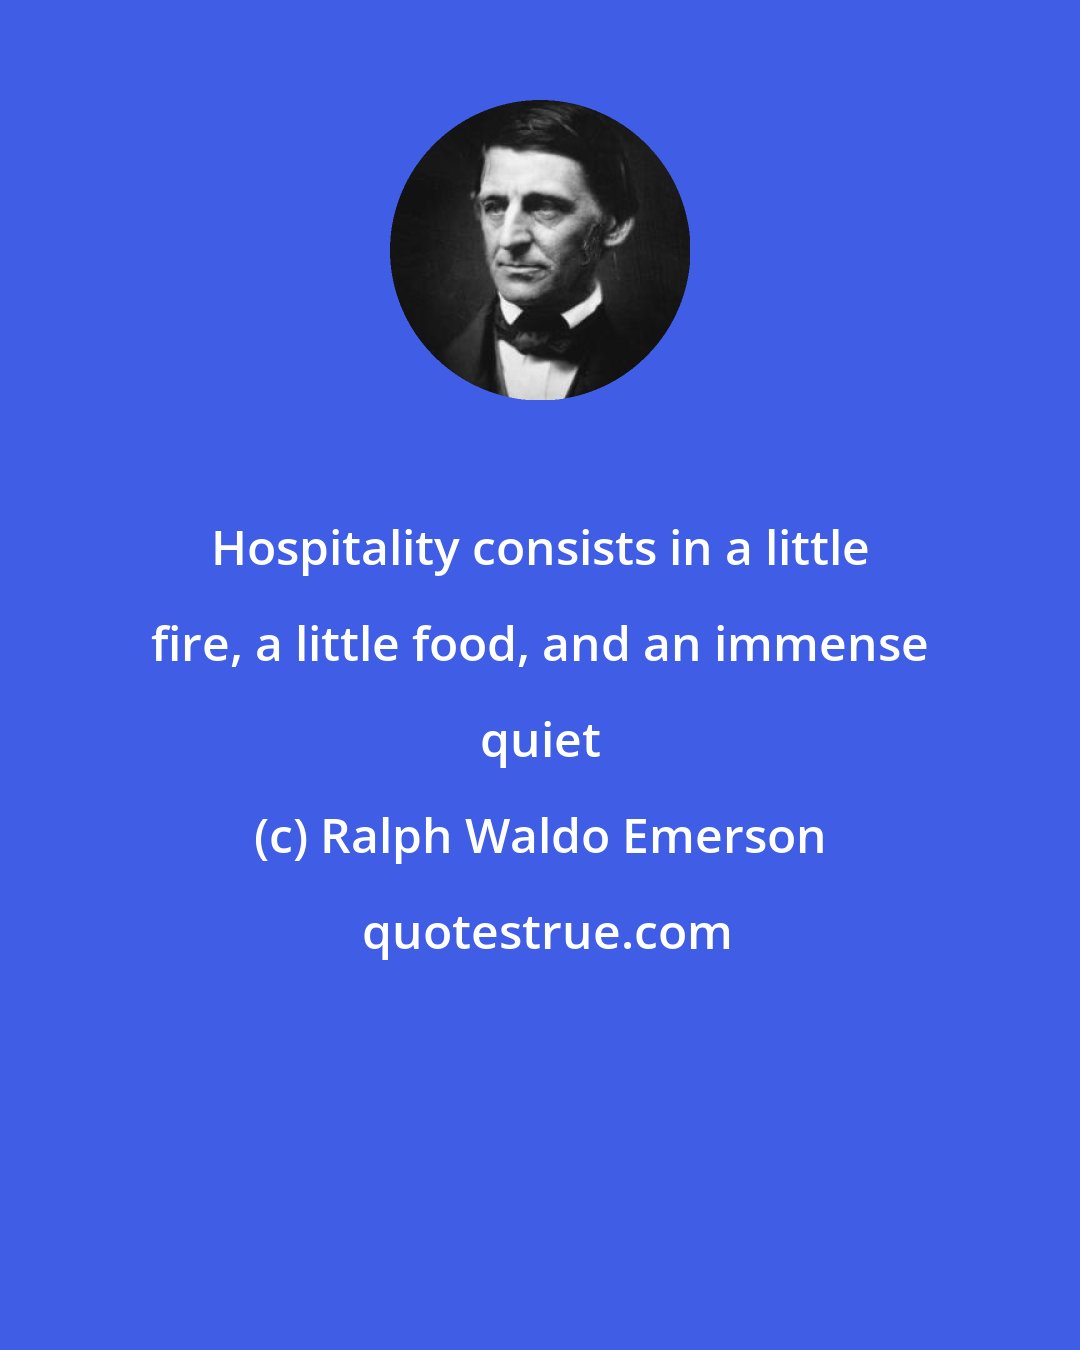 Ralph Waldo Emerson: Hospitality consists in a little fire, a little food, and an immense quiet